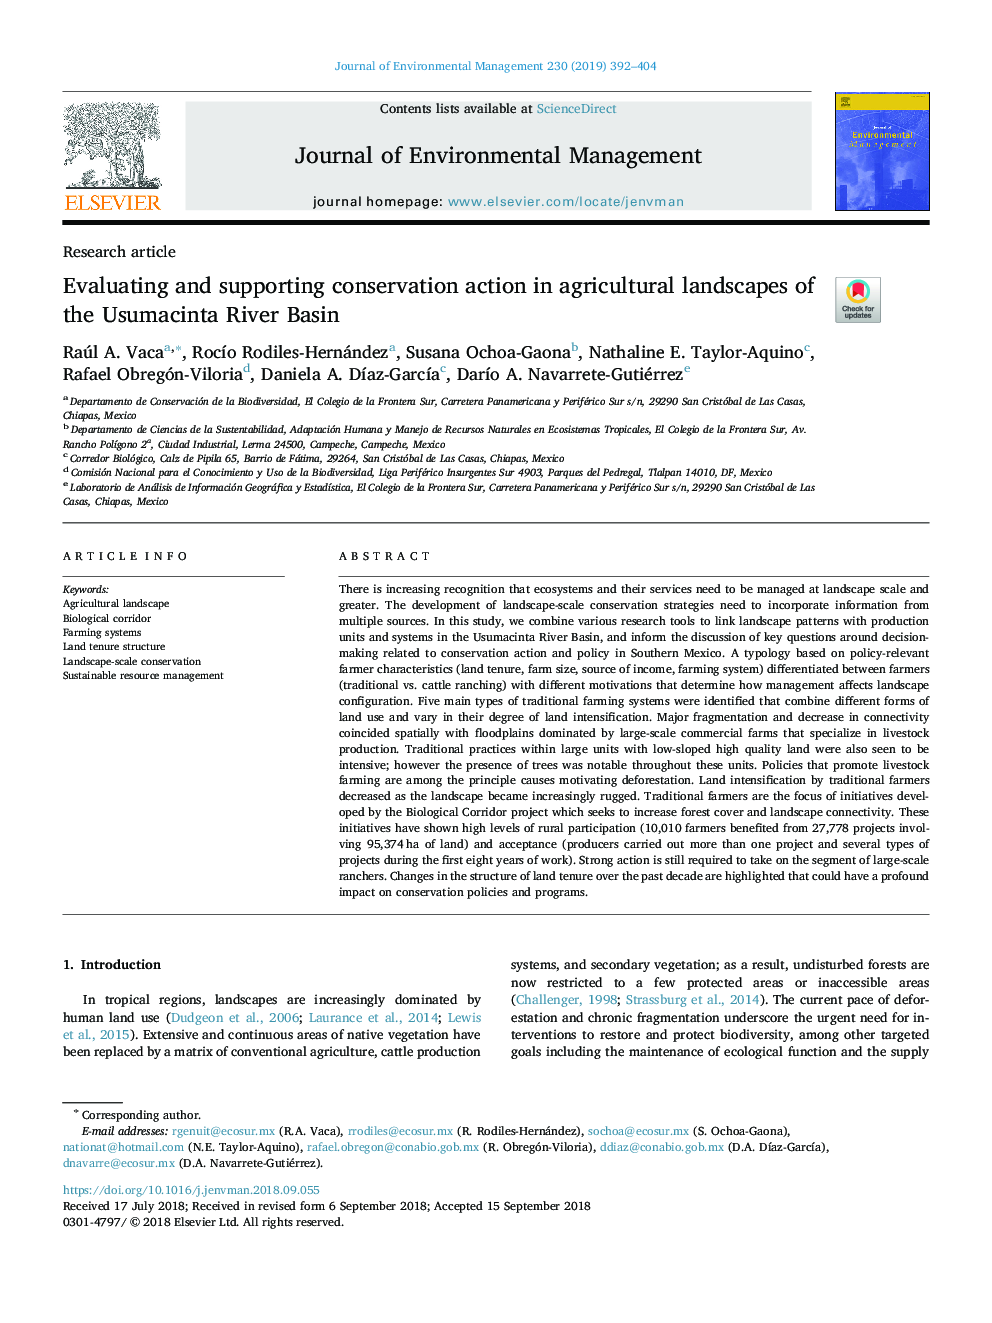 Evaluating and supporting conservation action in agricultural landscapes of the Usumacinta River Basin